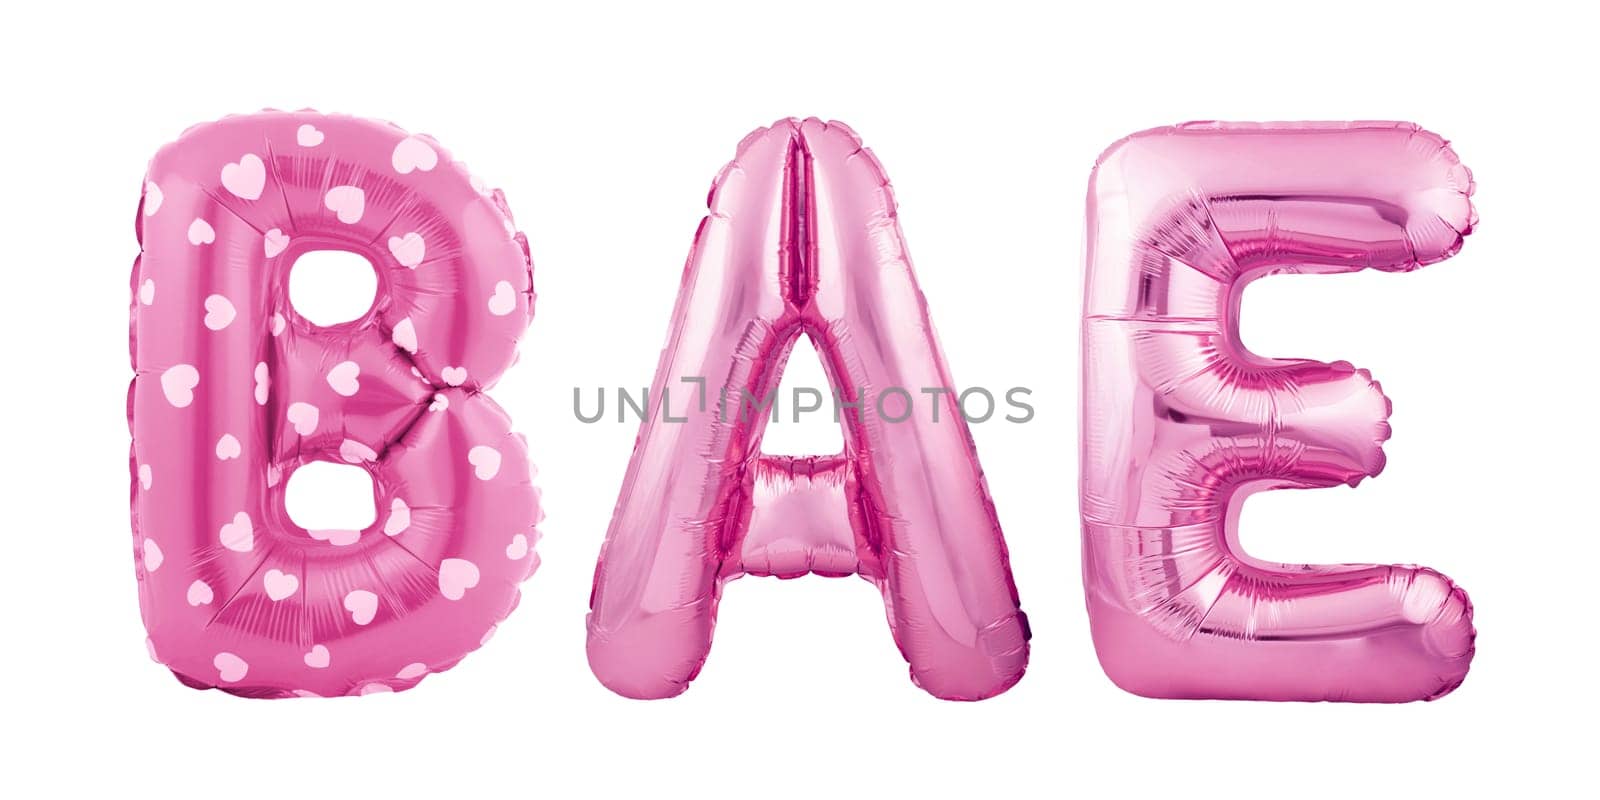 BAE word made of pink inflatable balloons isolated on white background. BAE slang concept